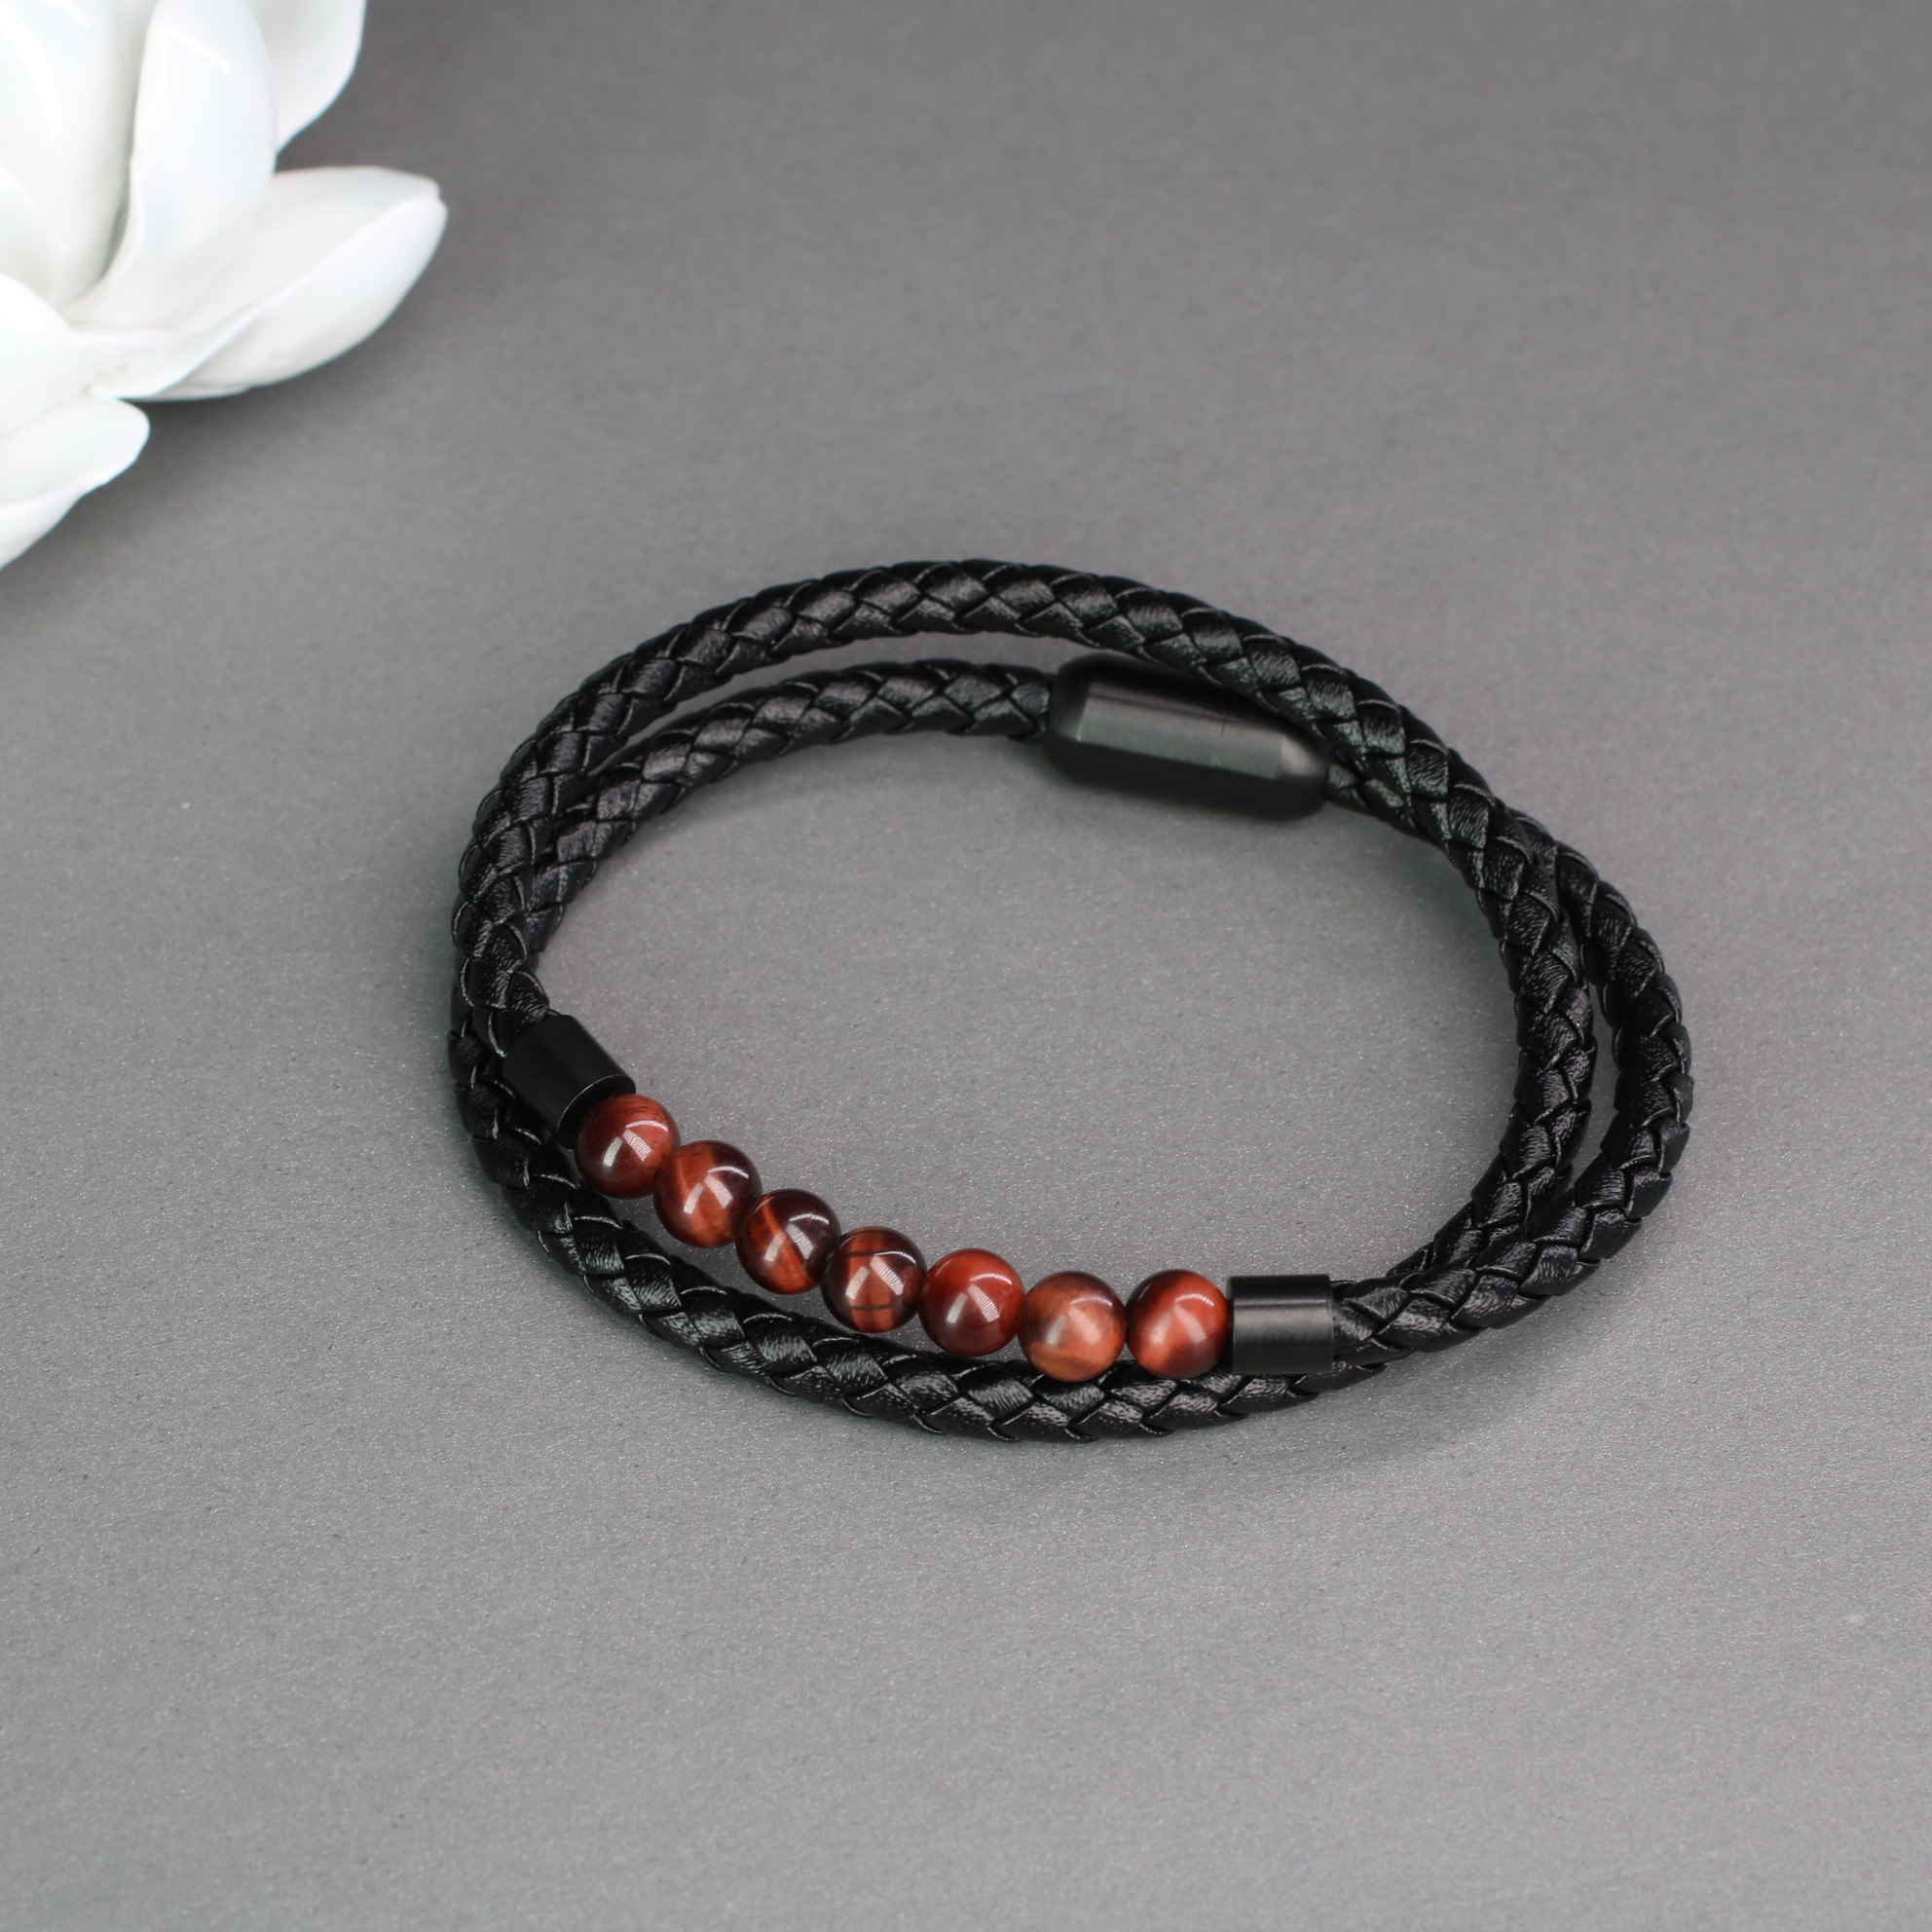 COAI-Mens-Red-Tiger-Eye-Stone-Double-Layer-Beaded-Leather-Bracelet